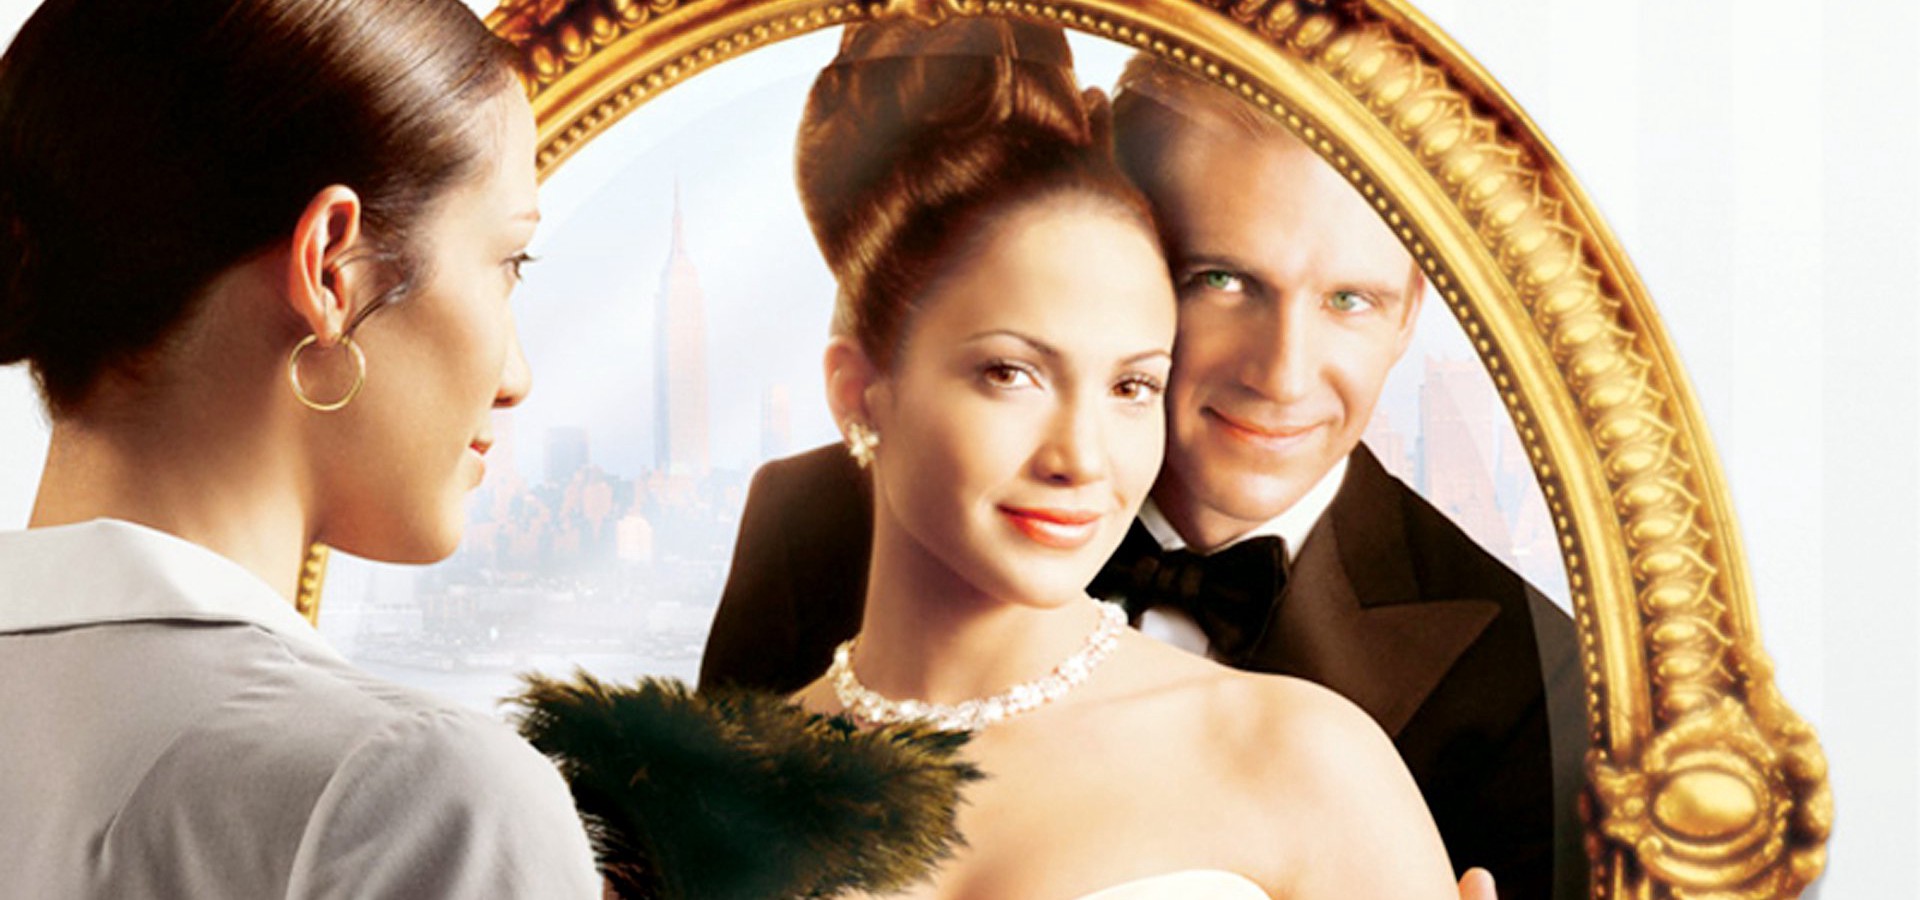 Maid In Manhattan Streaming Where To Watch Online